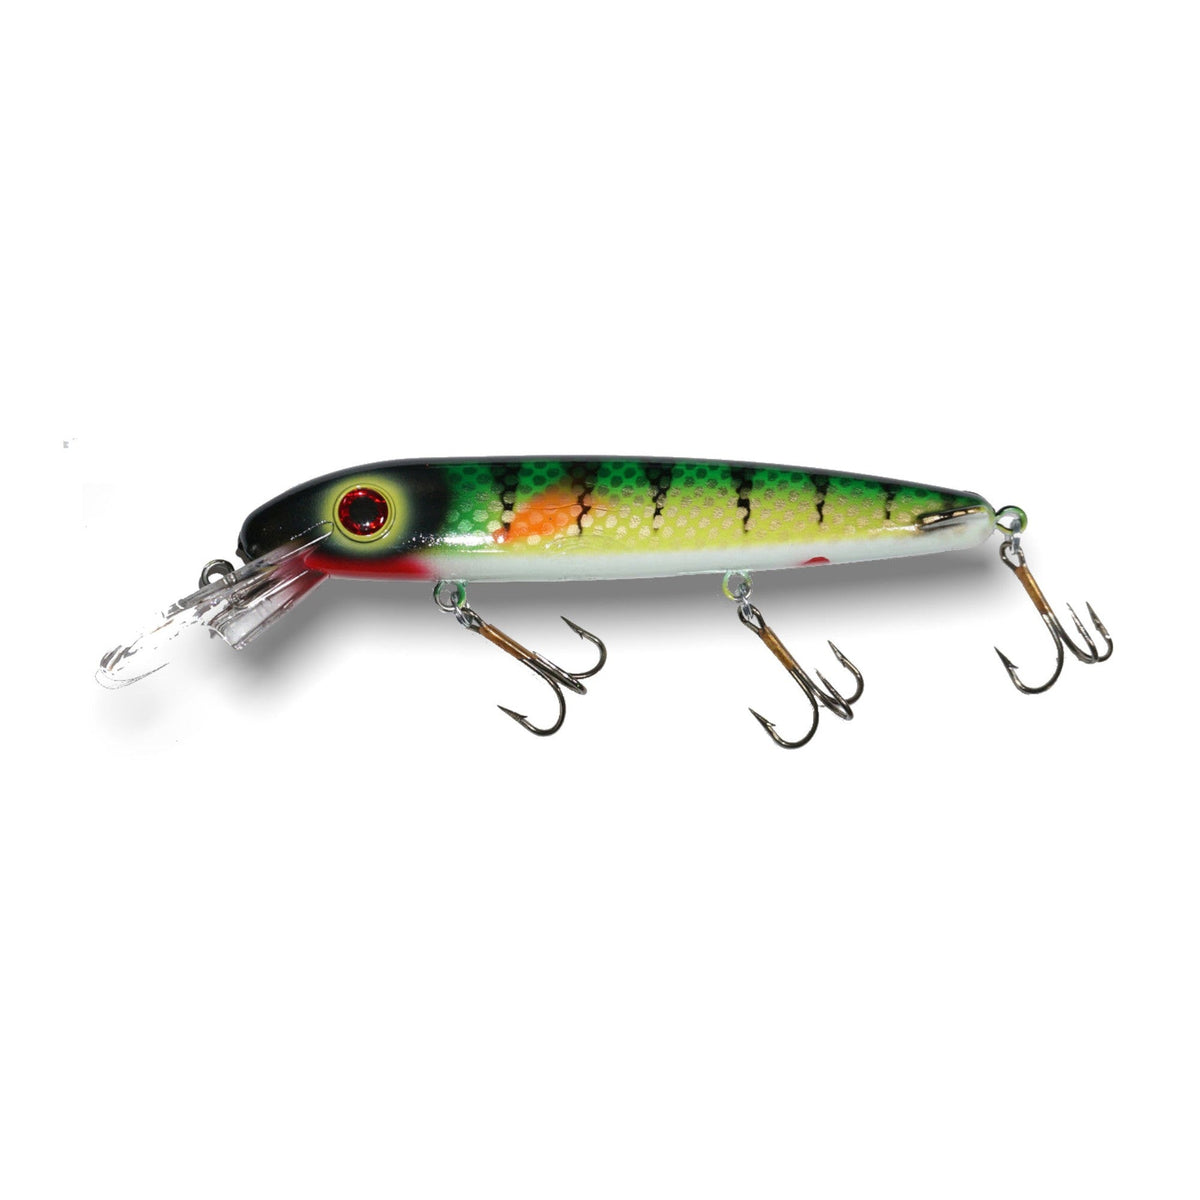 View of Crankbaits ERC Triple D Crankbait Perch available at EZOKO Pike and Musky Shop